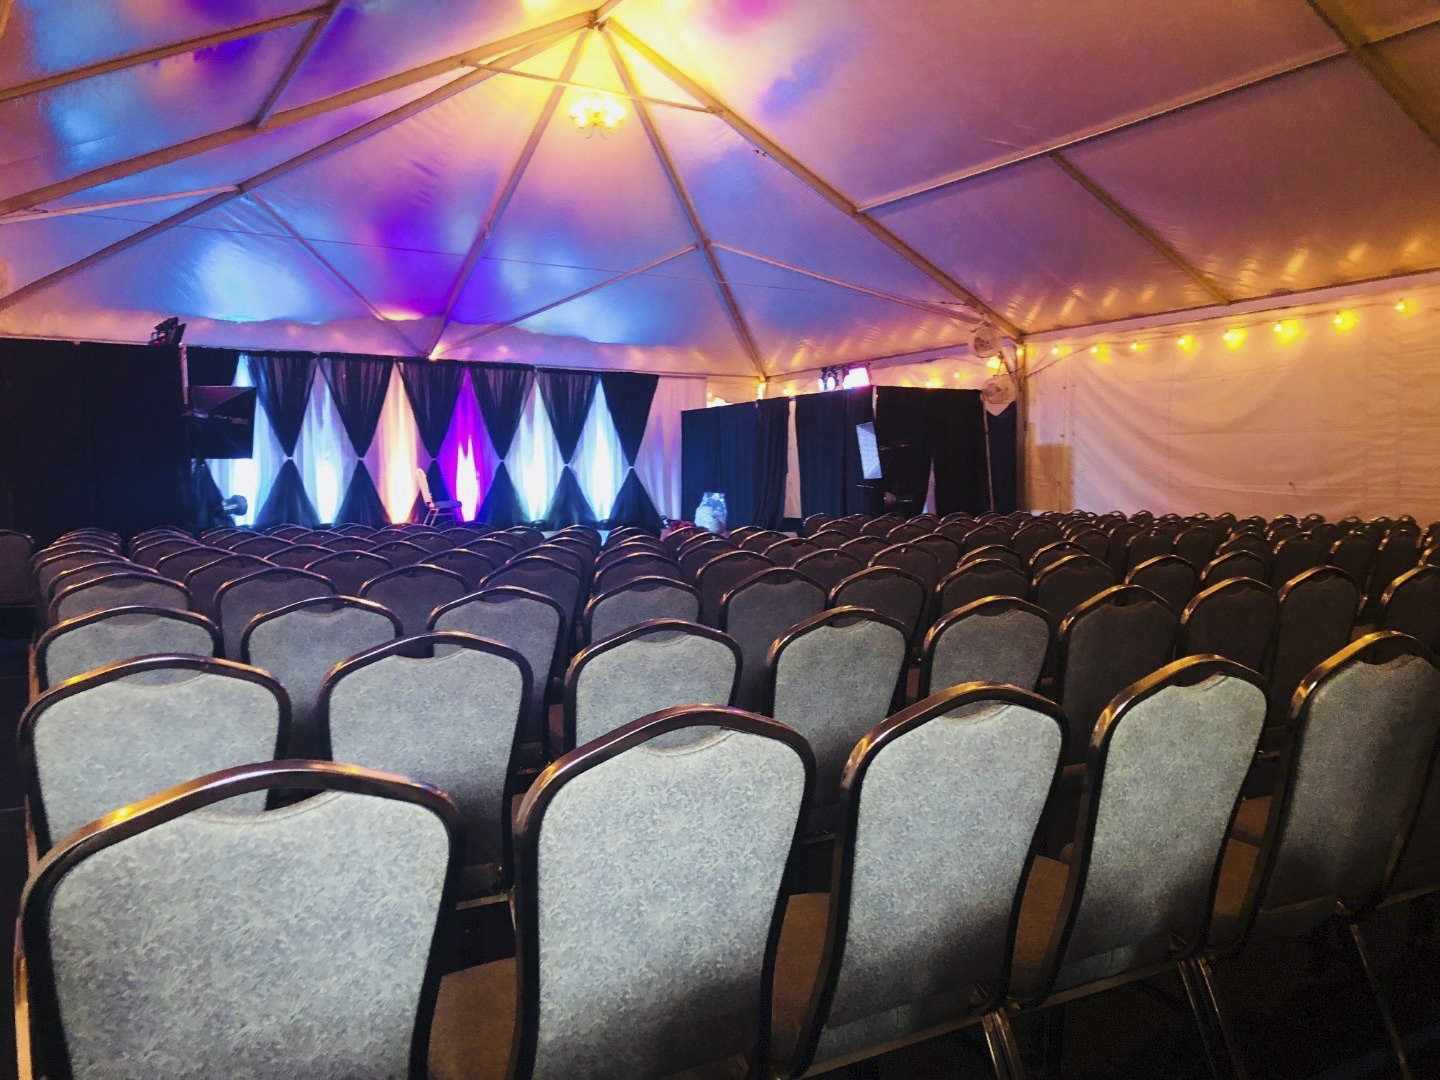 rows of chairs under a tent with lights